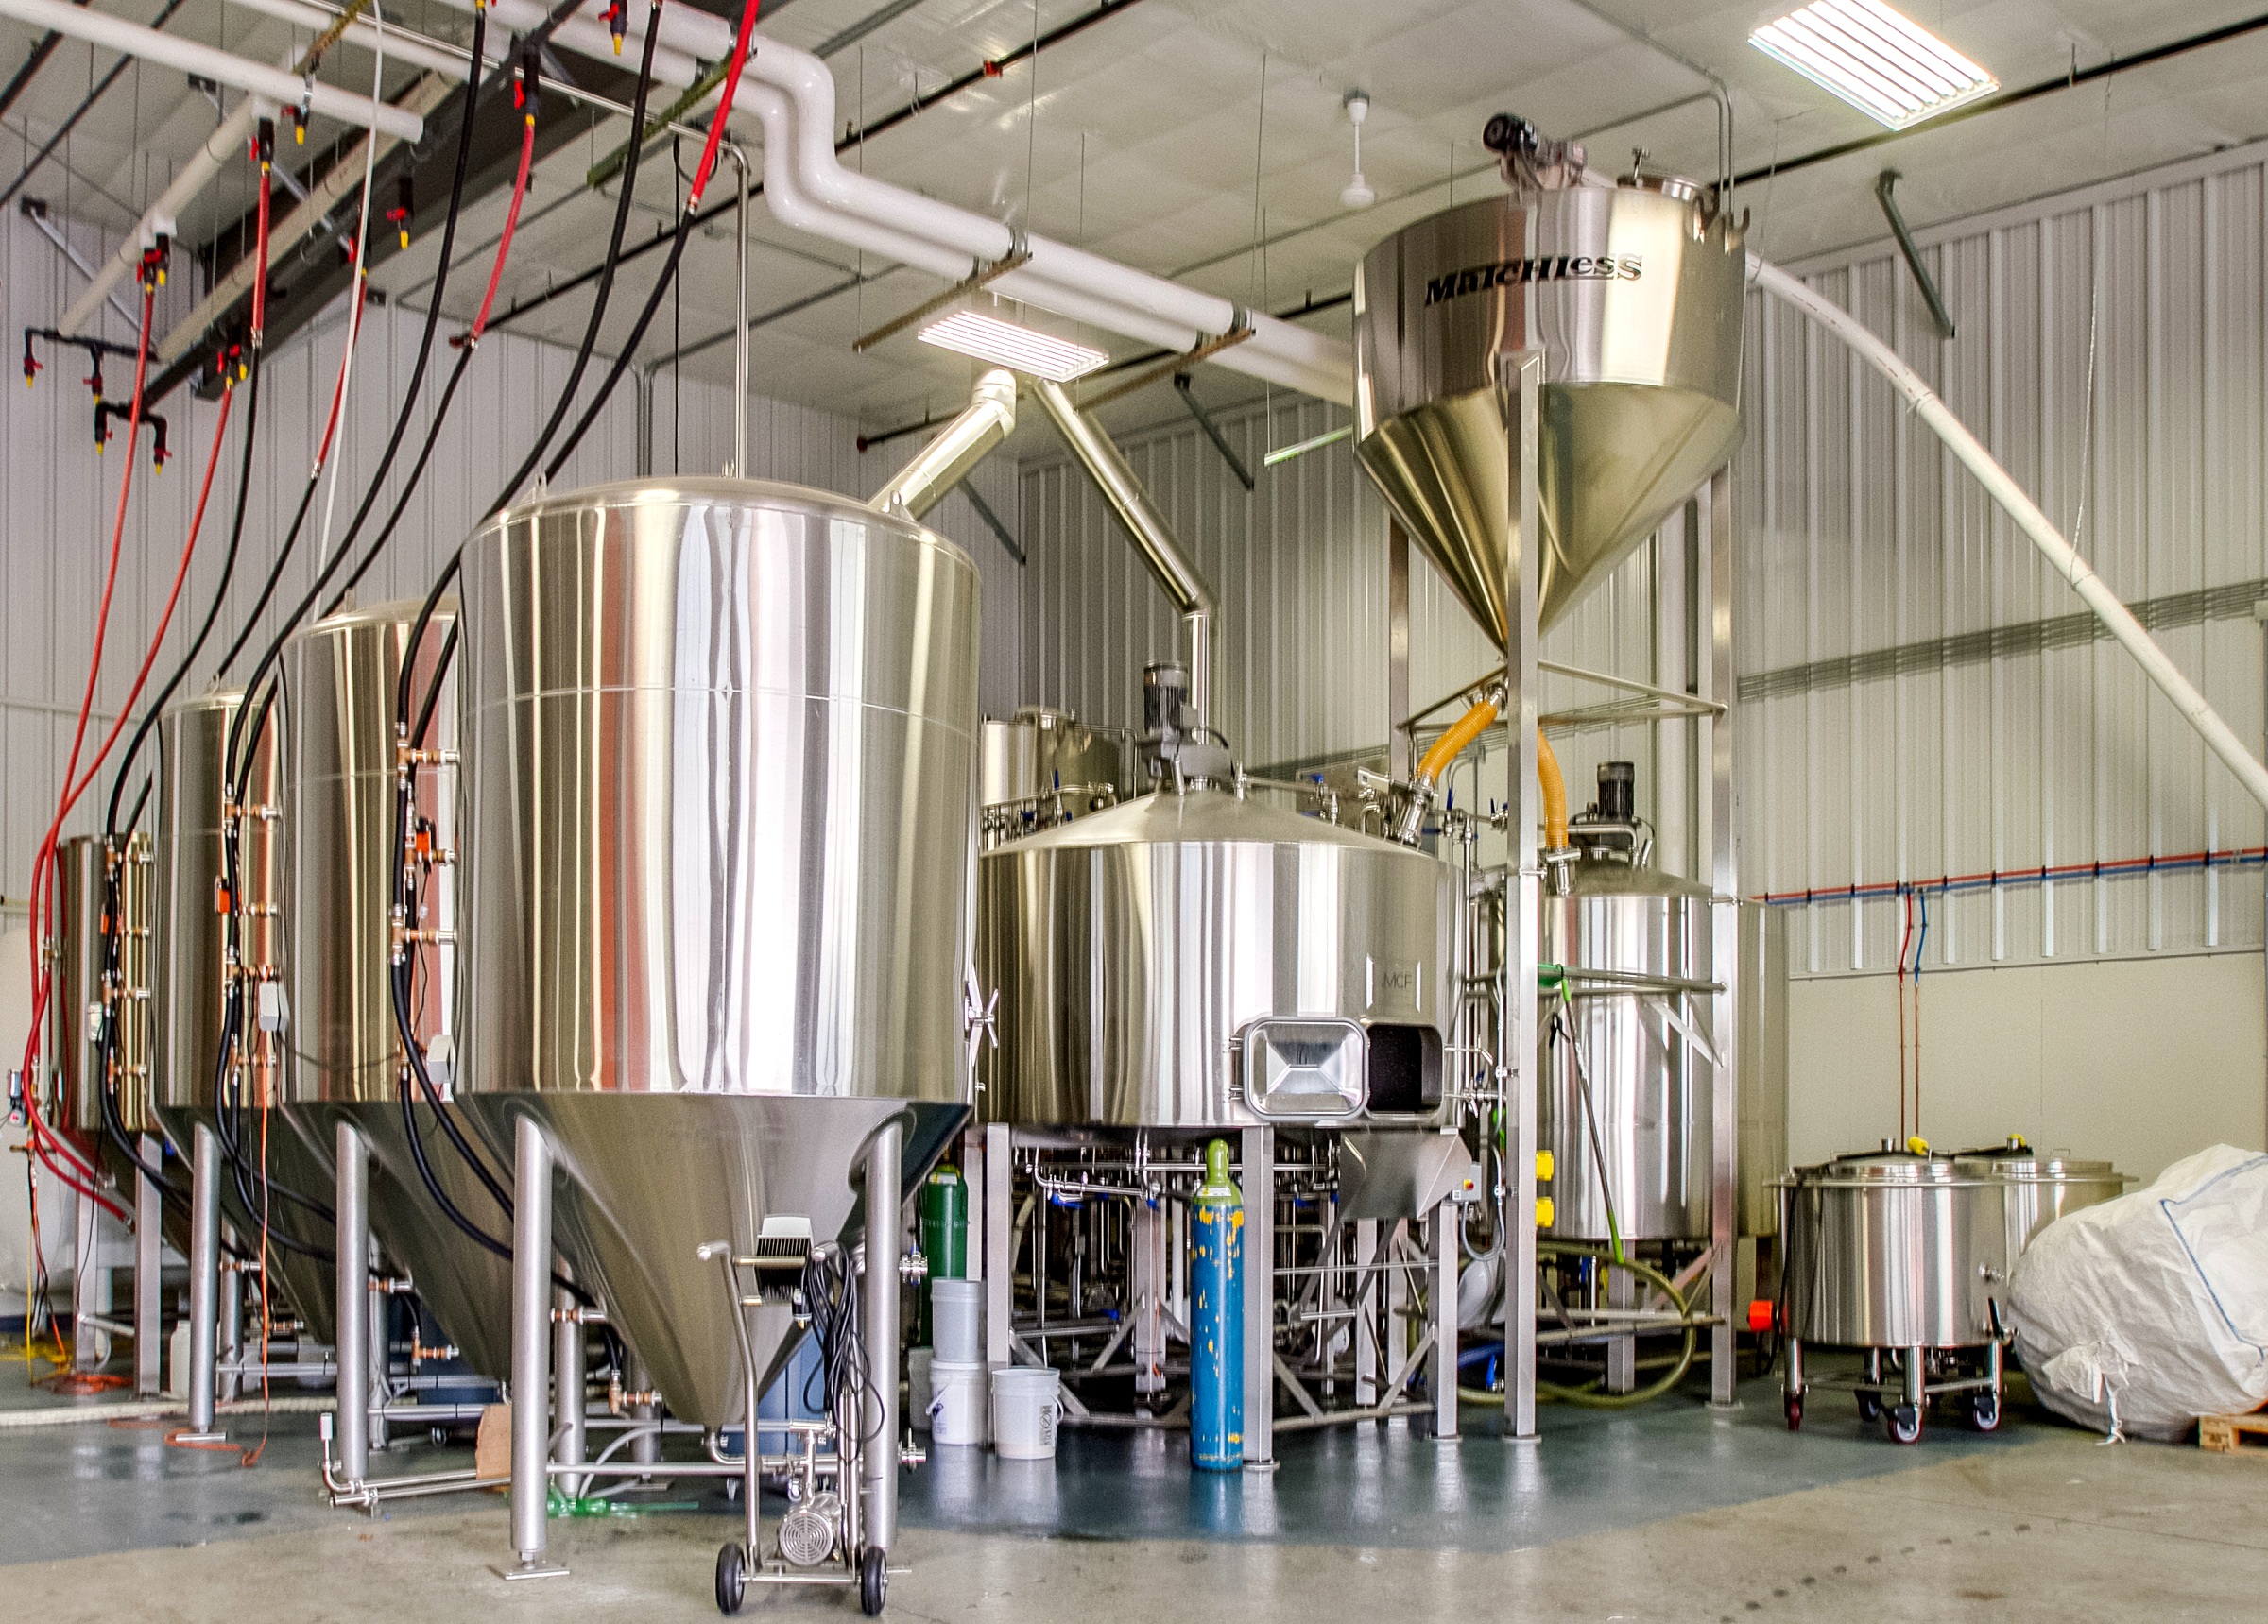  Grab a pint while taking in the view of the production space.  Photo: D. Heinemann  